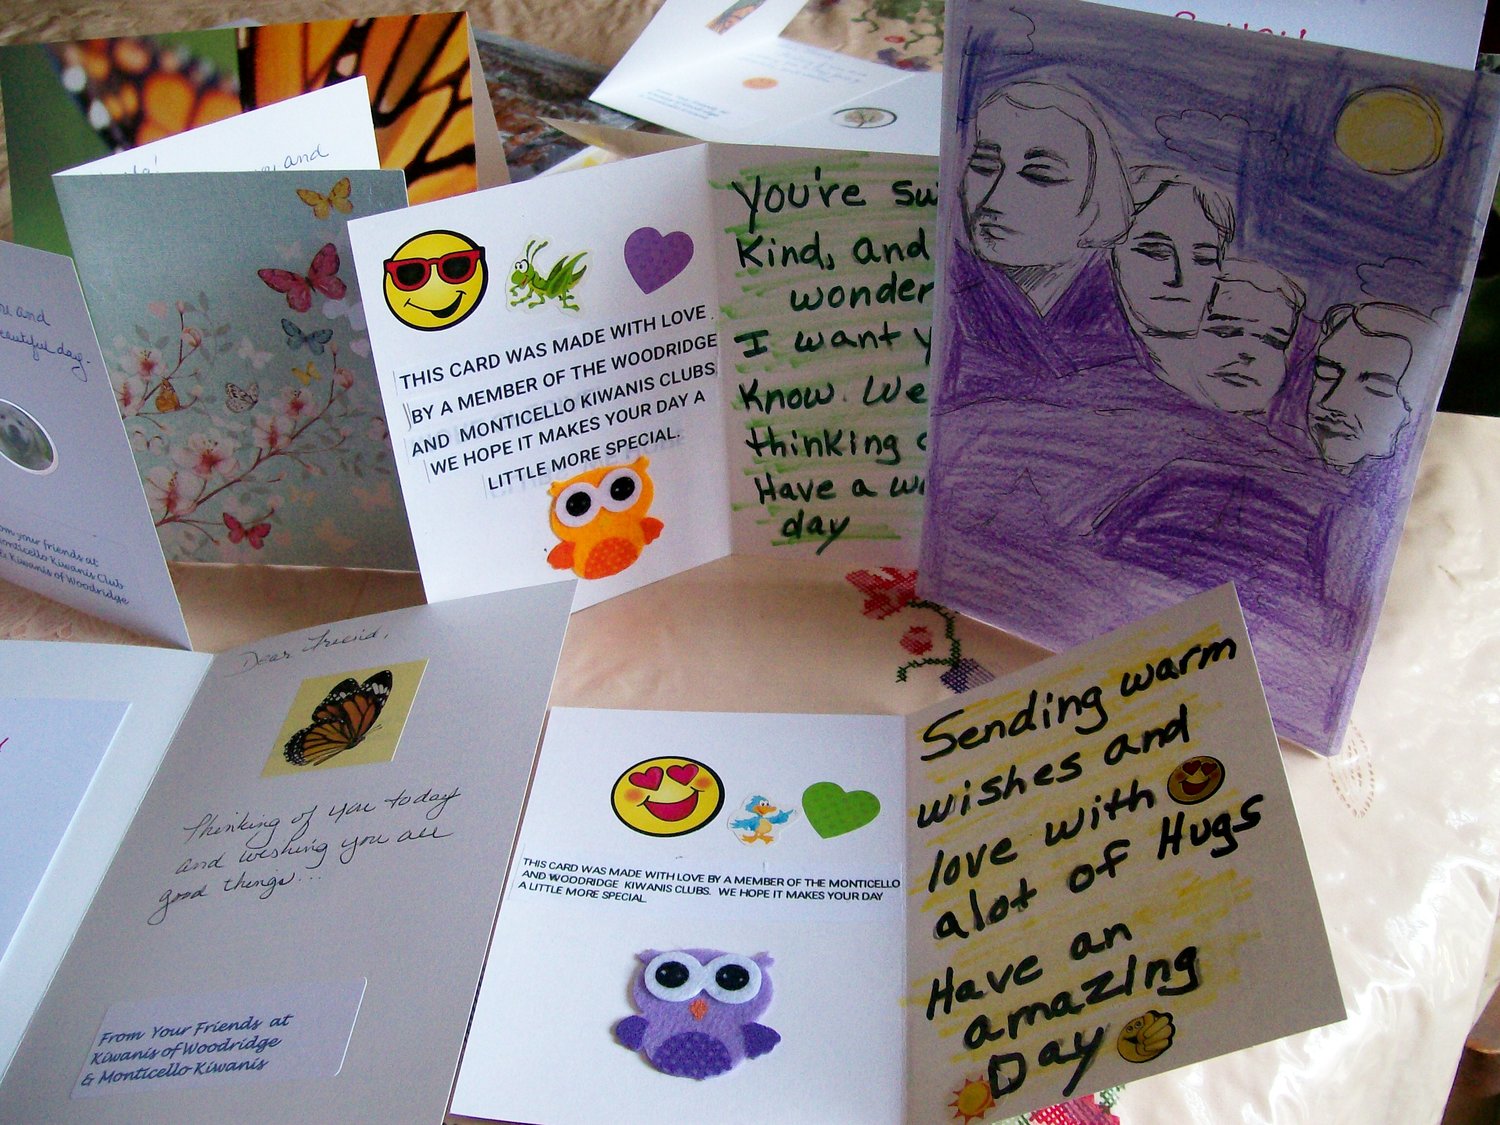 An assortment of handmade cards distributed to Achieve residents.